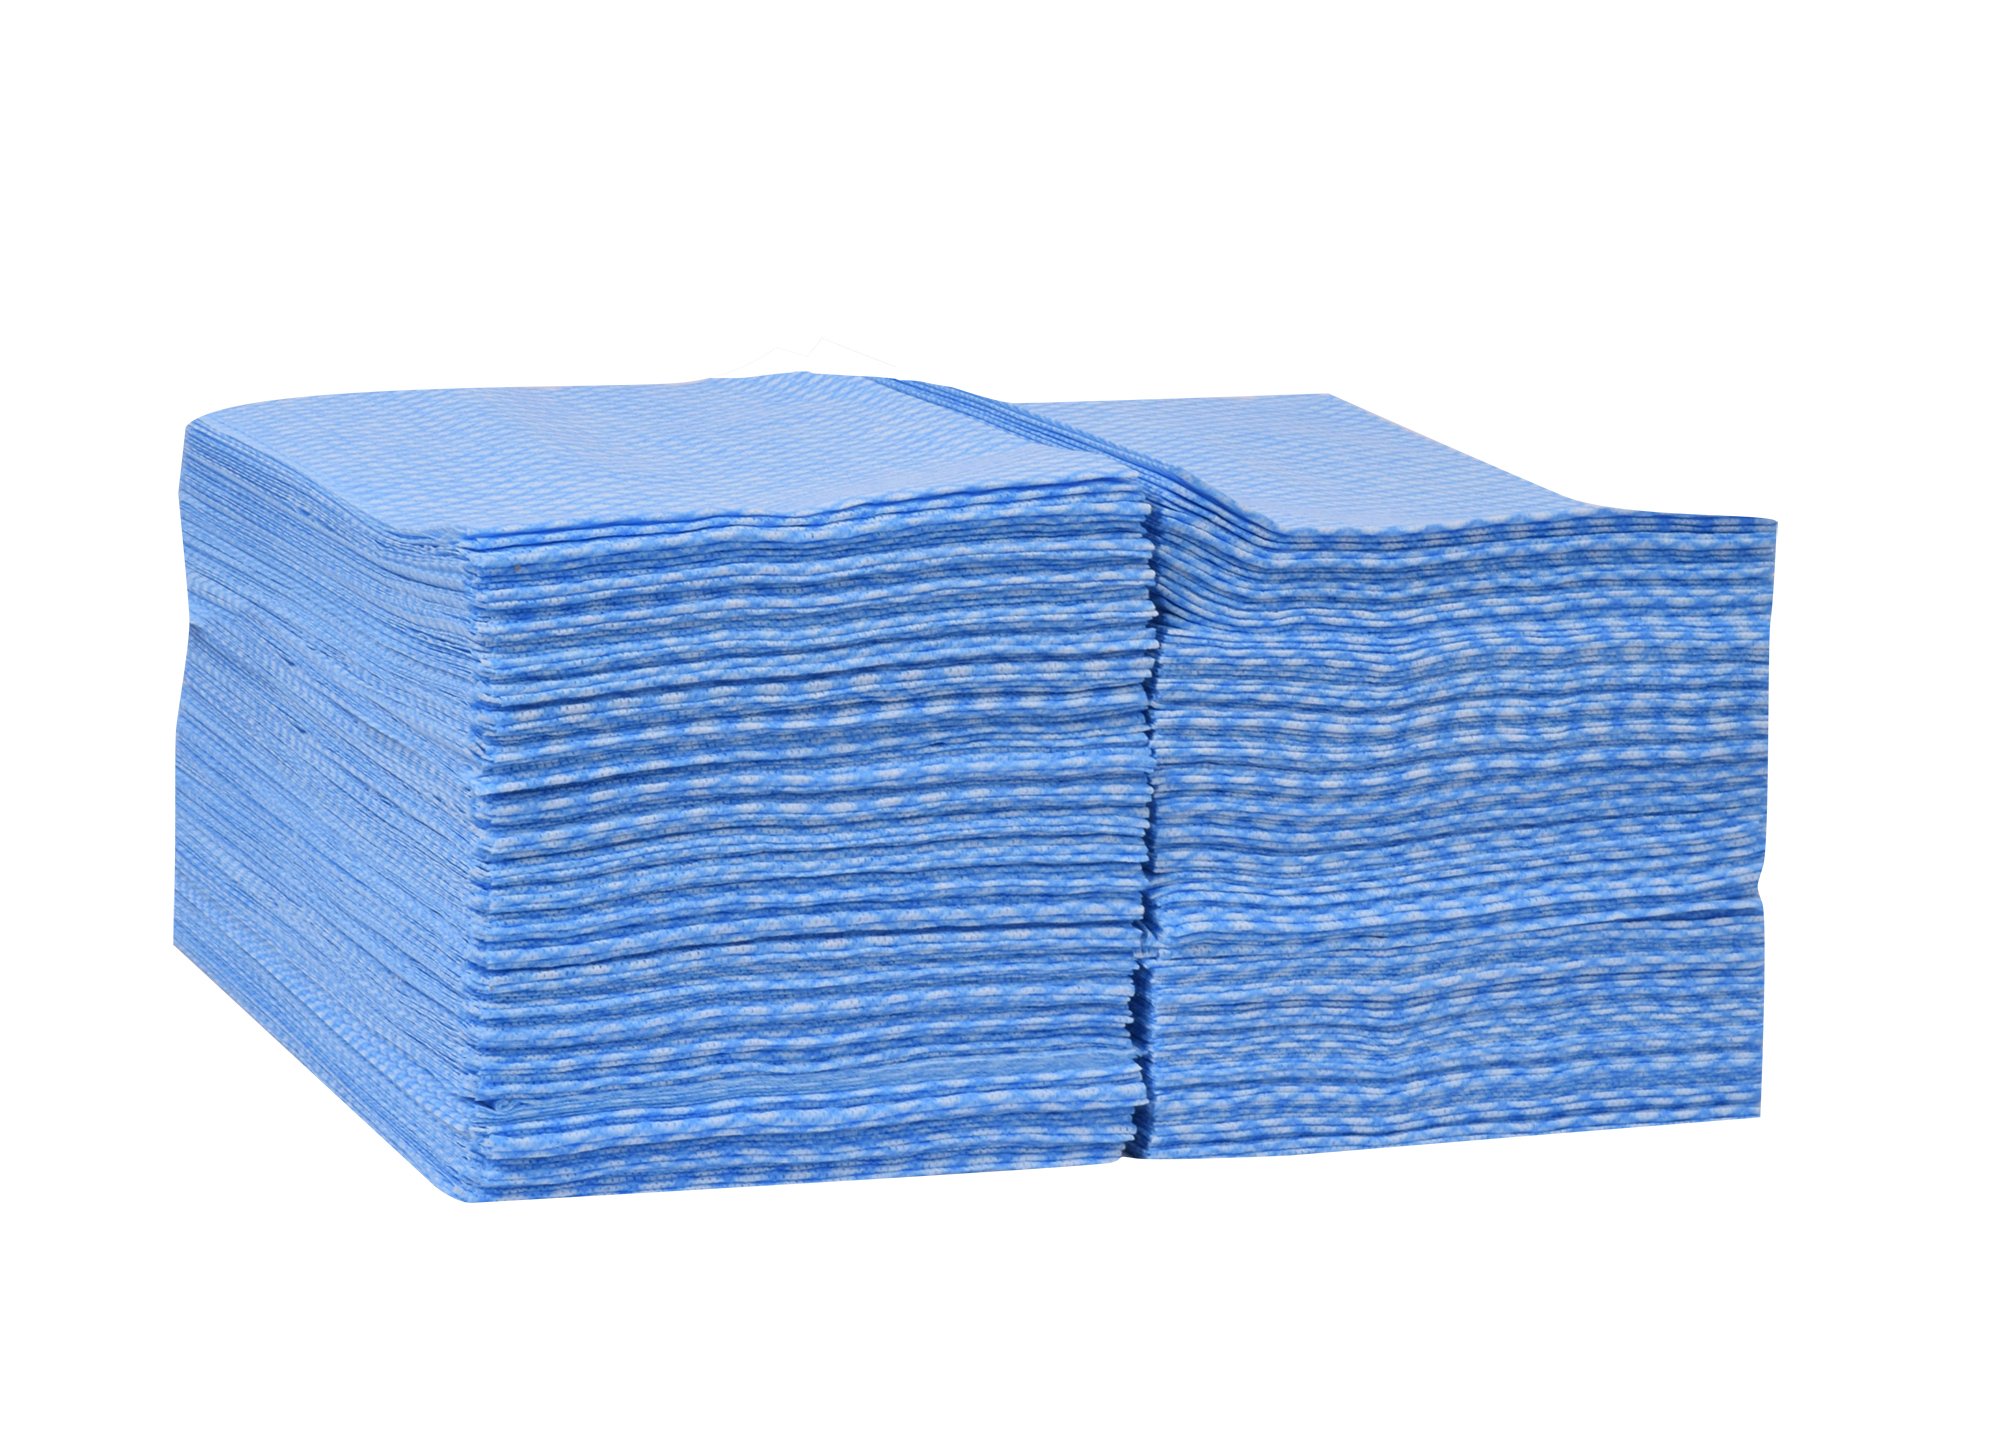 Tork Foodservice Cleaning Towel Blue/White Self Dispensing, 1/4 Folded, 1 x 240 Cloths, 192181A